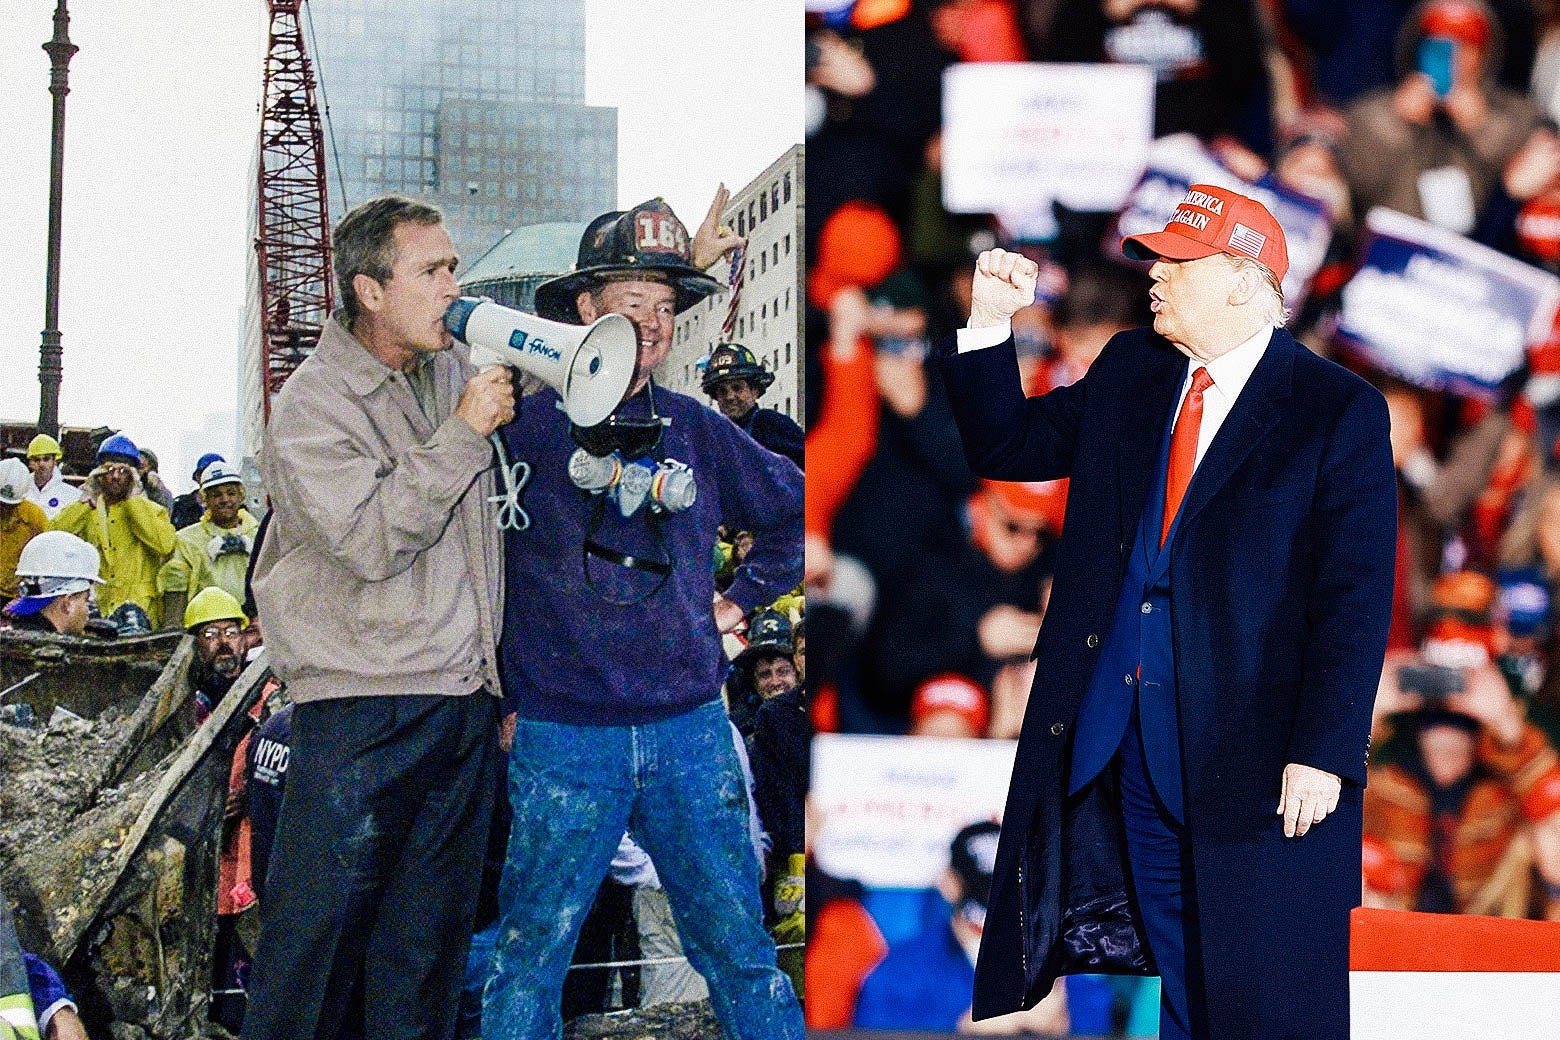 Left: Bush speaking through a megaphone, surrounded by WTC wreckage and emergency responders. Right: Trump pumping his fist, with a crowd in the background.